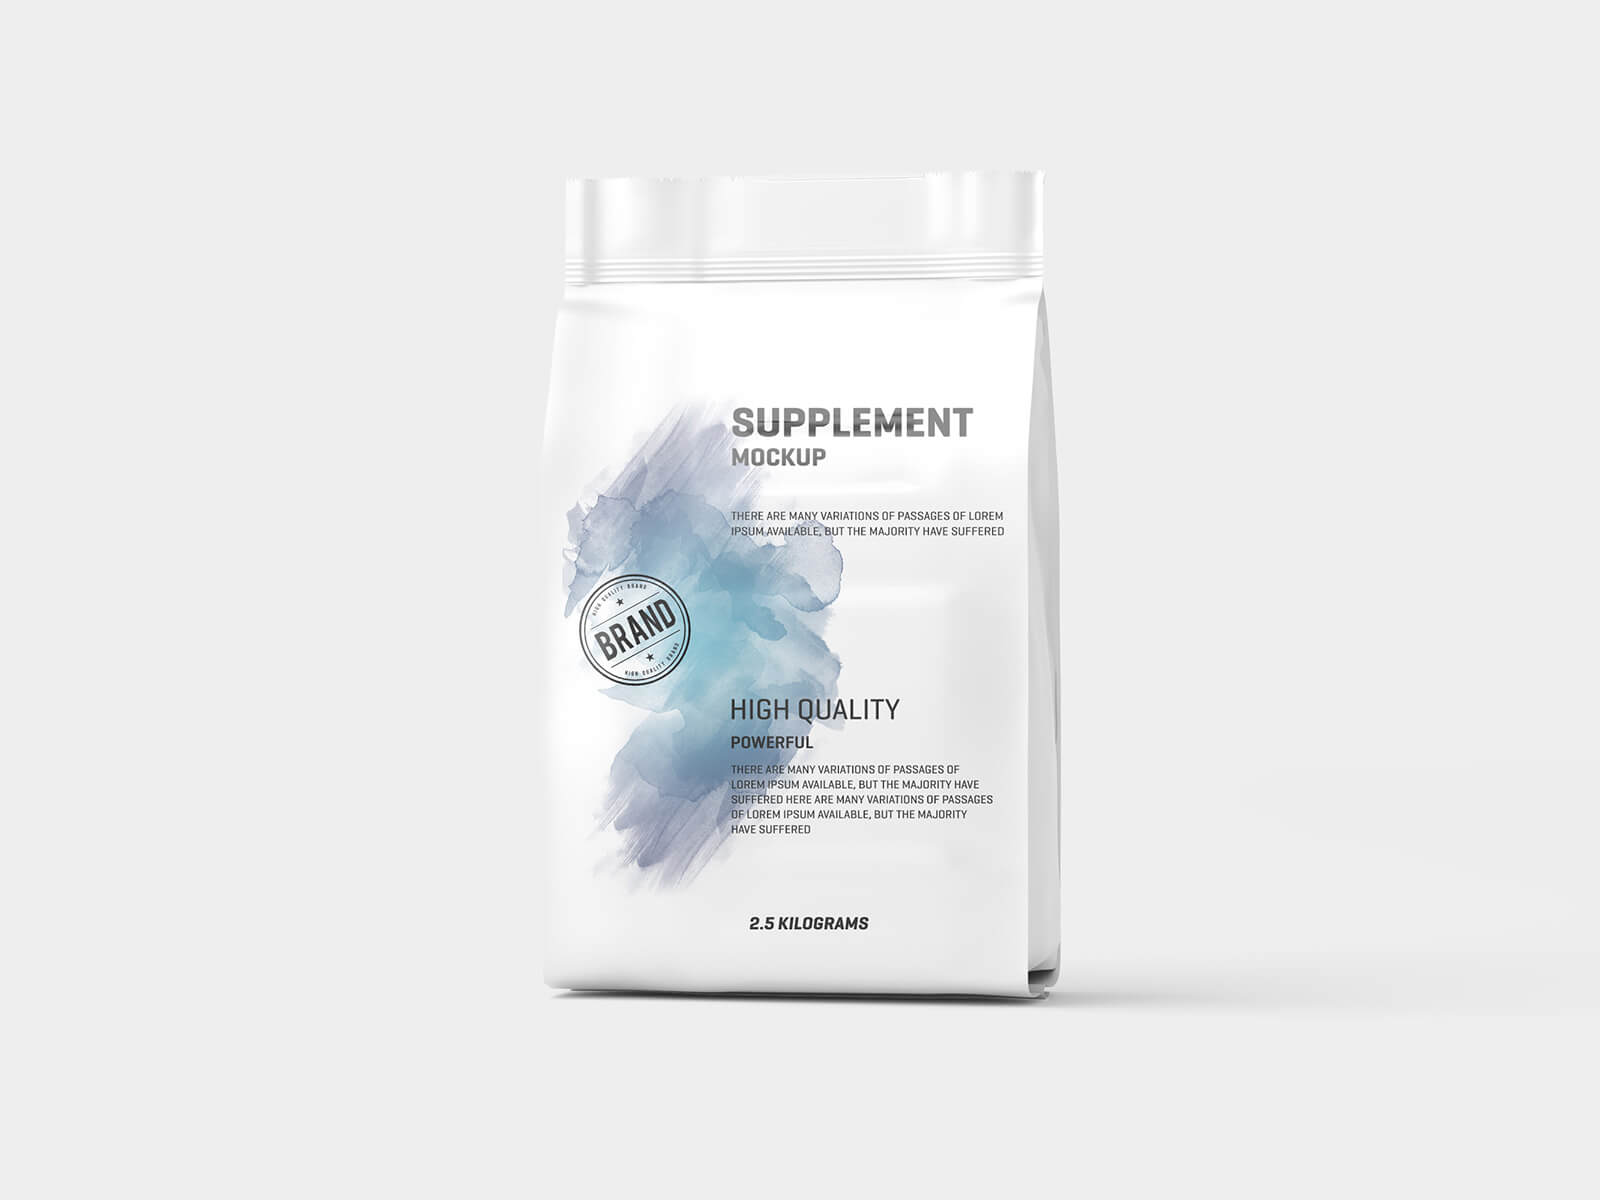 Free Protein Supplement Jar Pack Mockup PSD